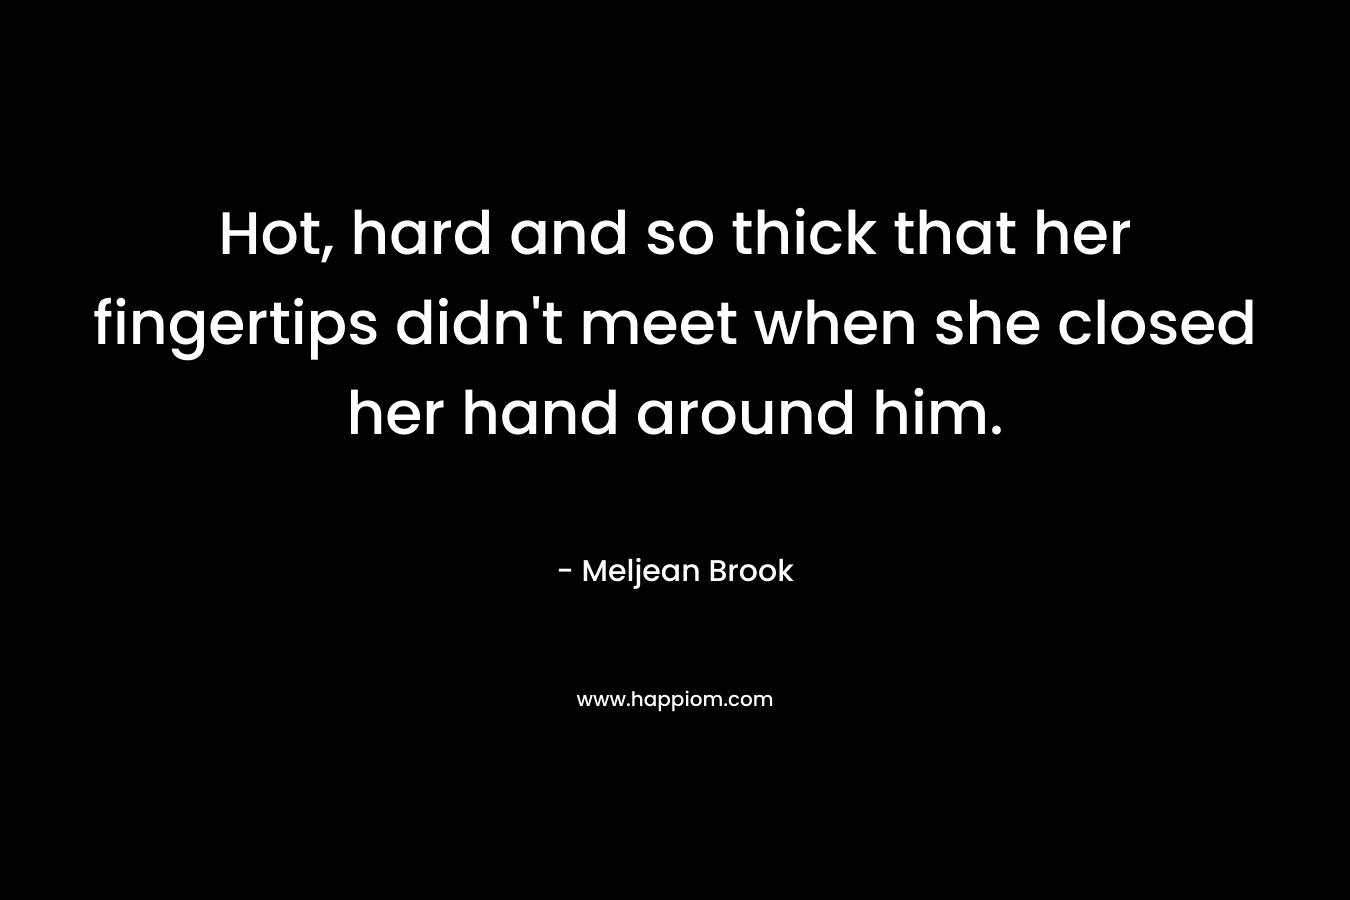 Hot, hard and so thick that her fingertips didn’t meet when she closed her hand around him. – Meljean Brook